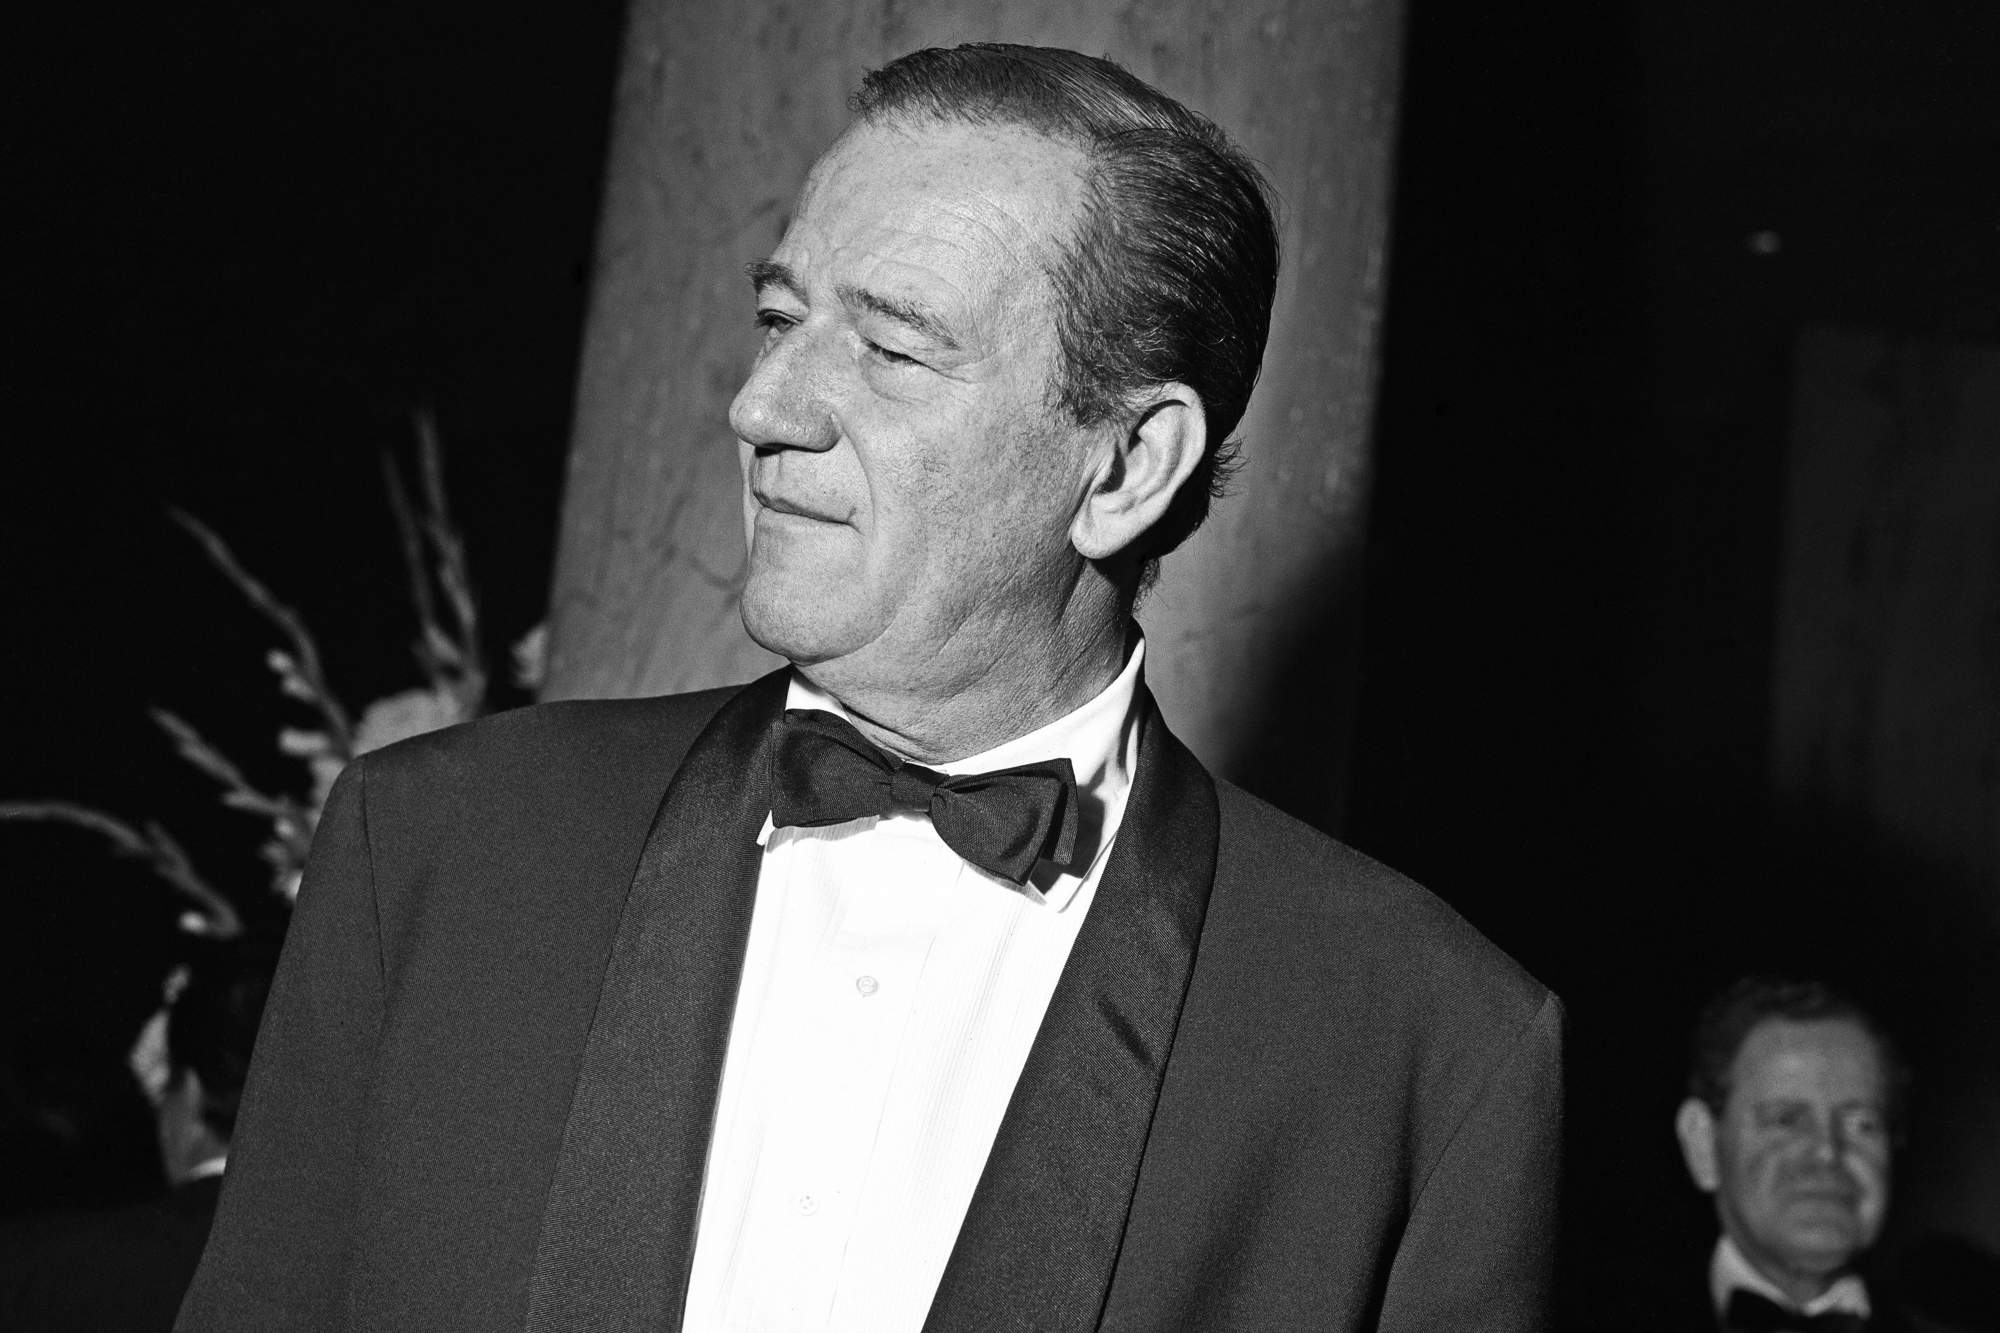 John Wayne, who was involved in a racist bit at the 1958 Oscars. He's wearing a tux in a black-and-white picture.